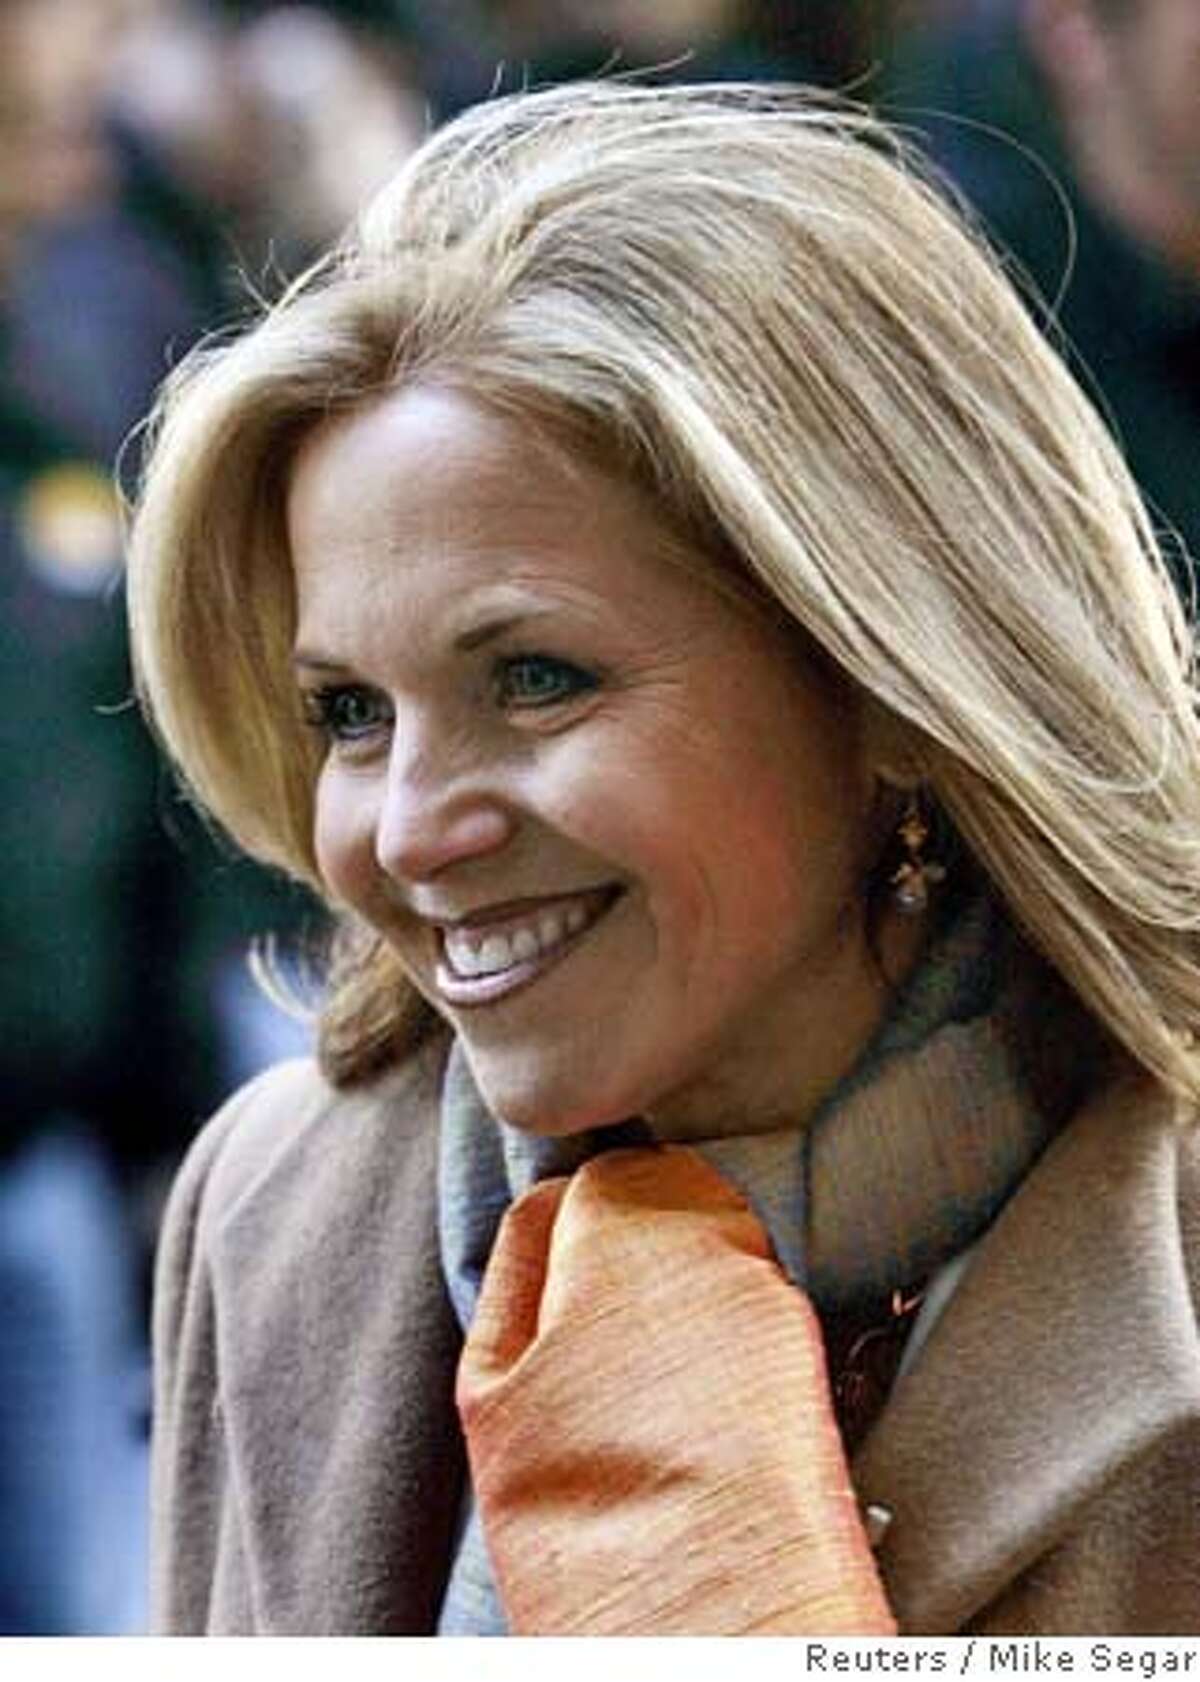 Katie Couric, co-host of the NBC Today show is seen during a break in the broadcast of the program outside NBC's New York City studios, April 5, 2006. Couric, earlier in the show, told her audience that she will be leaving NBC to join the CBS Evening News where she will become the first woman to solo anchor a network evening newscast. The 49-year-old Couric has been on Today for the past 15 years. REUTERS/Mike SegarRan on: 04-06-2006 Katie Couric confirmed she is leaving NBCs Today show to join CBS Evening News as the first woman to solo-anchor a network evening newscast.Ran on: 04-06-2006 Katie Couric confirmed she is leaving NBCs Today show to join CBS Evening News as the first woman to solo-anchor a network evening newscast.